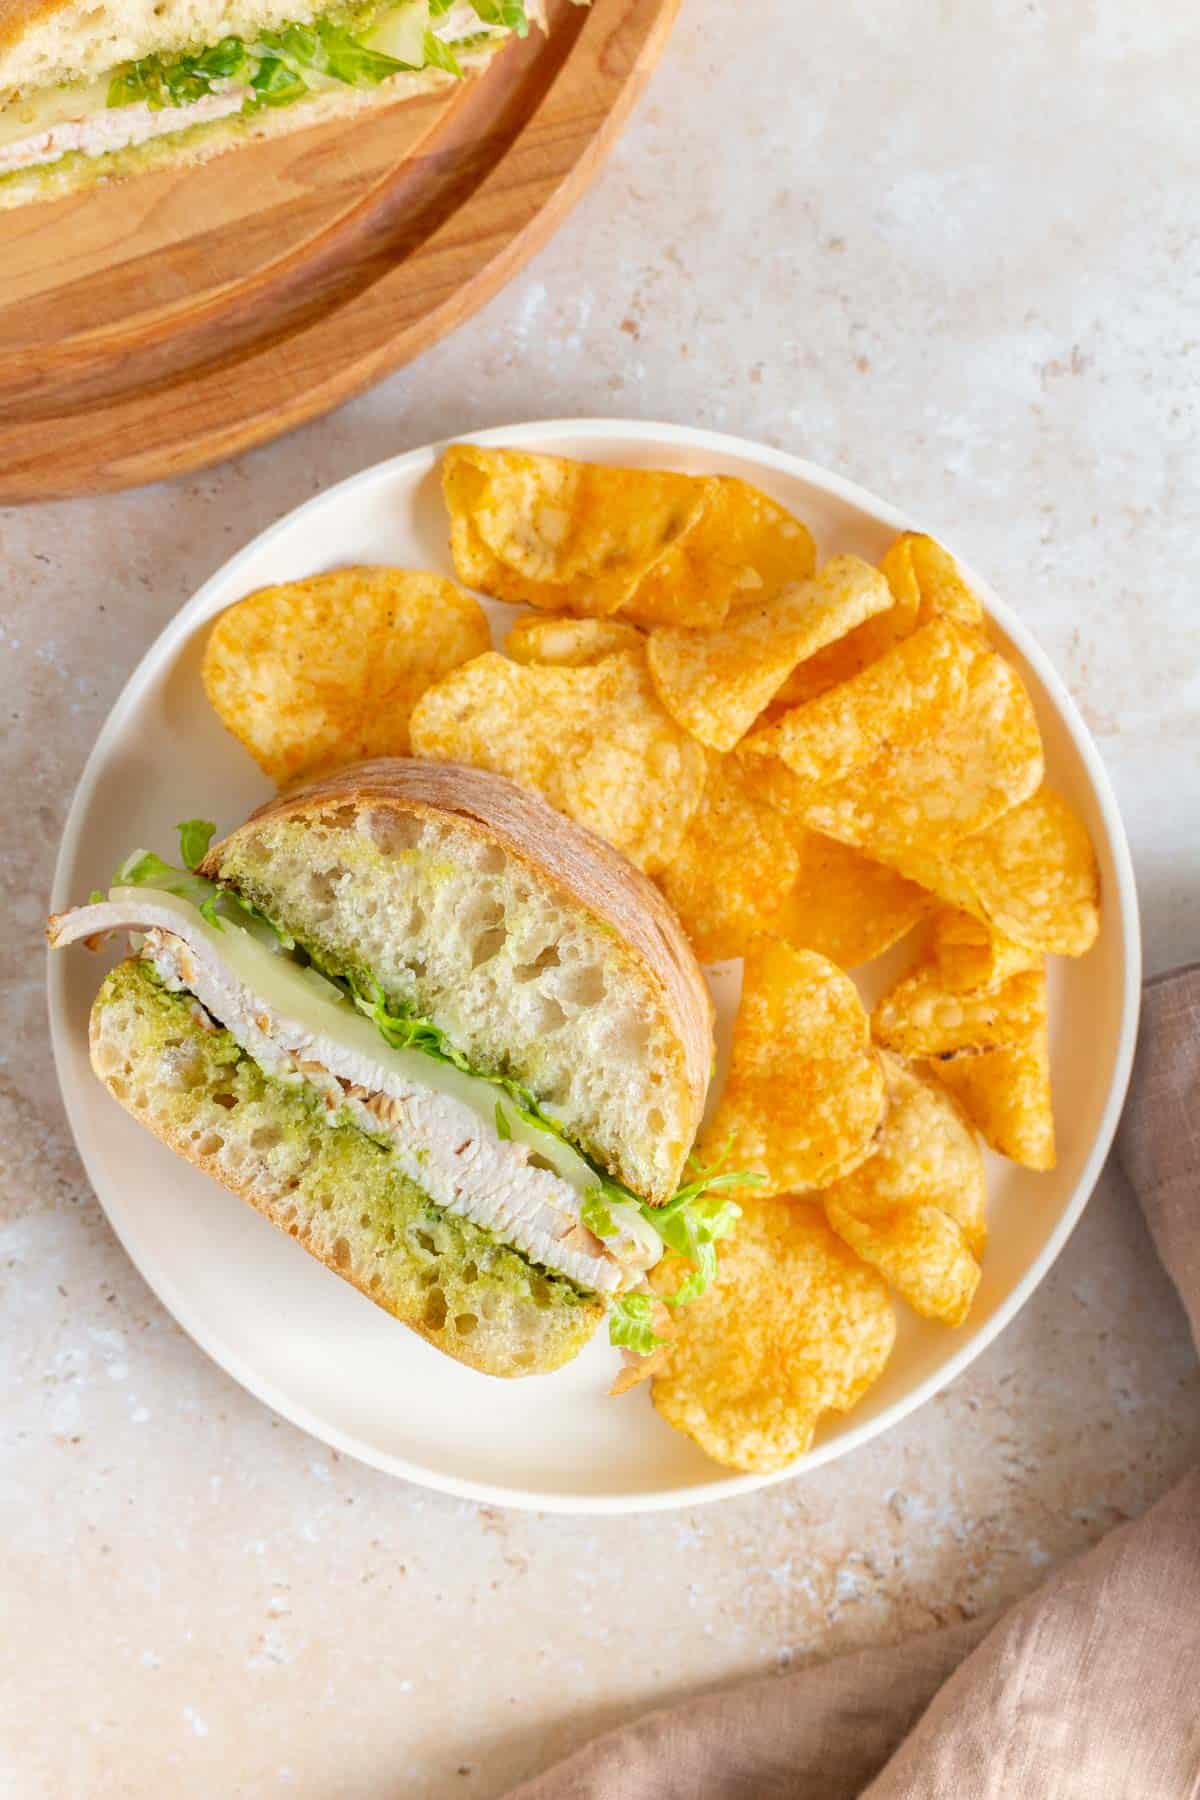 Overhead view of a serving of pesto turkey sandwich with chips on a plate.